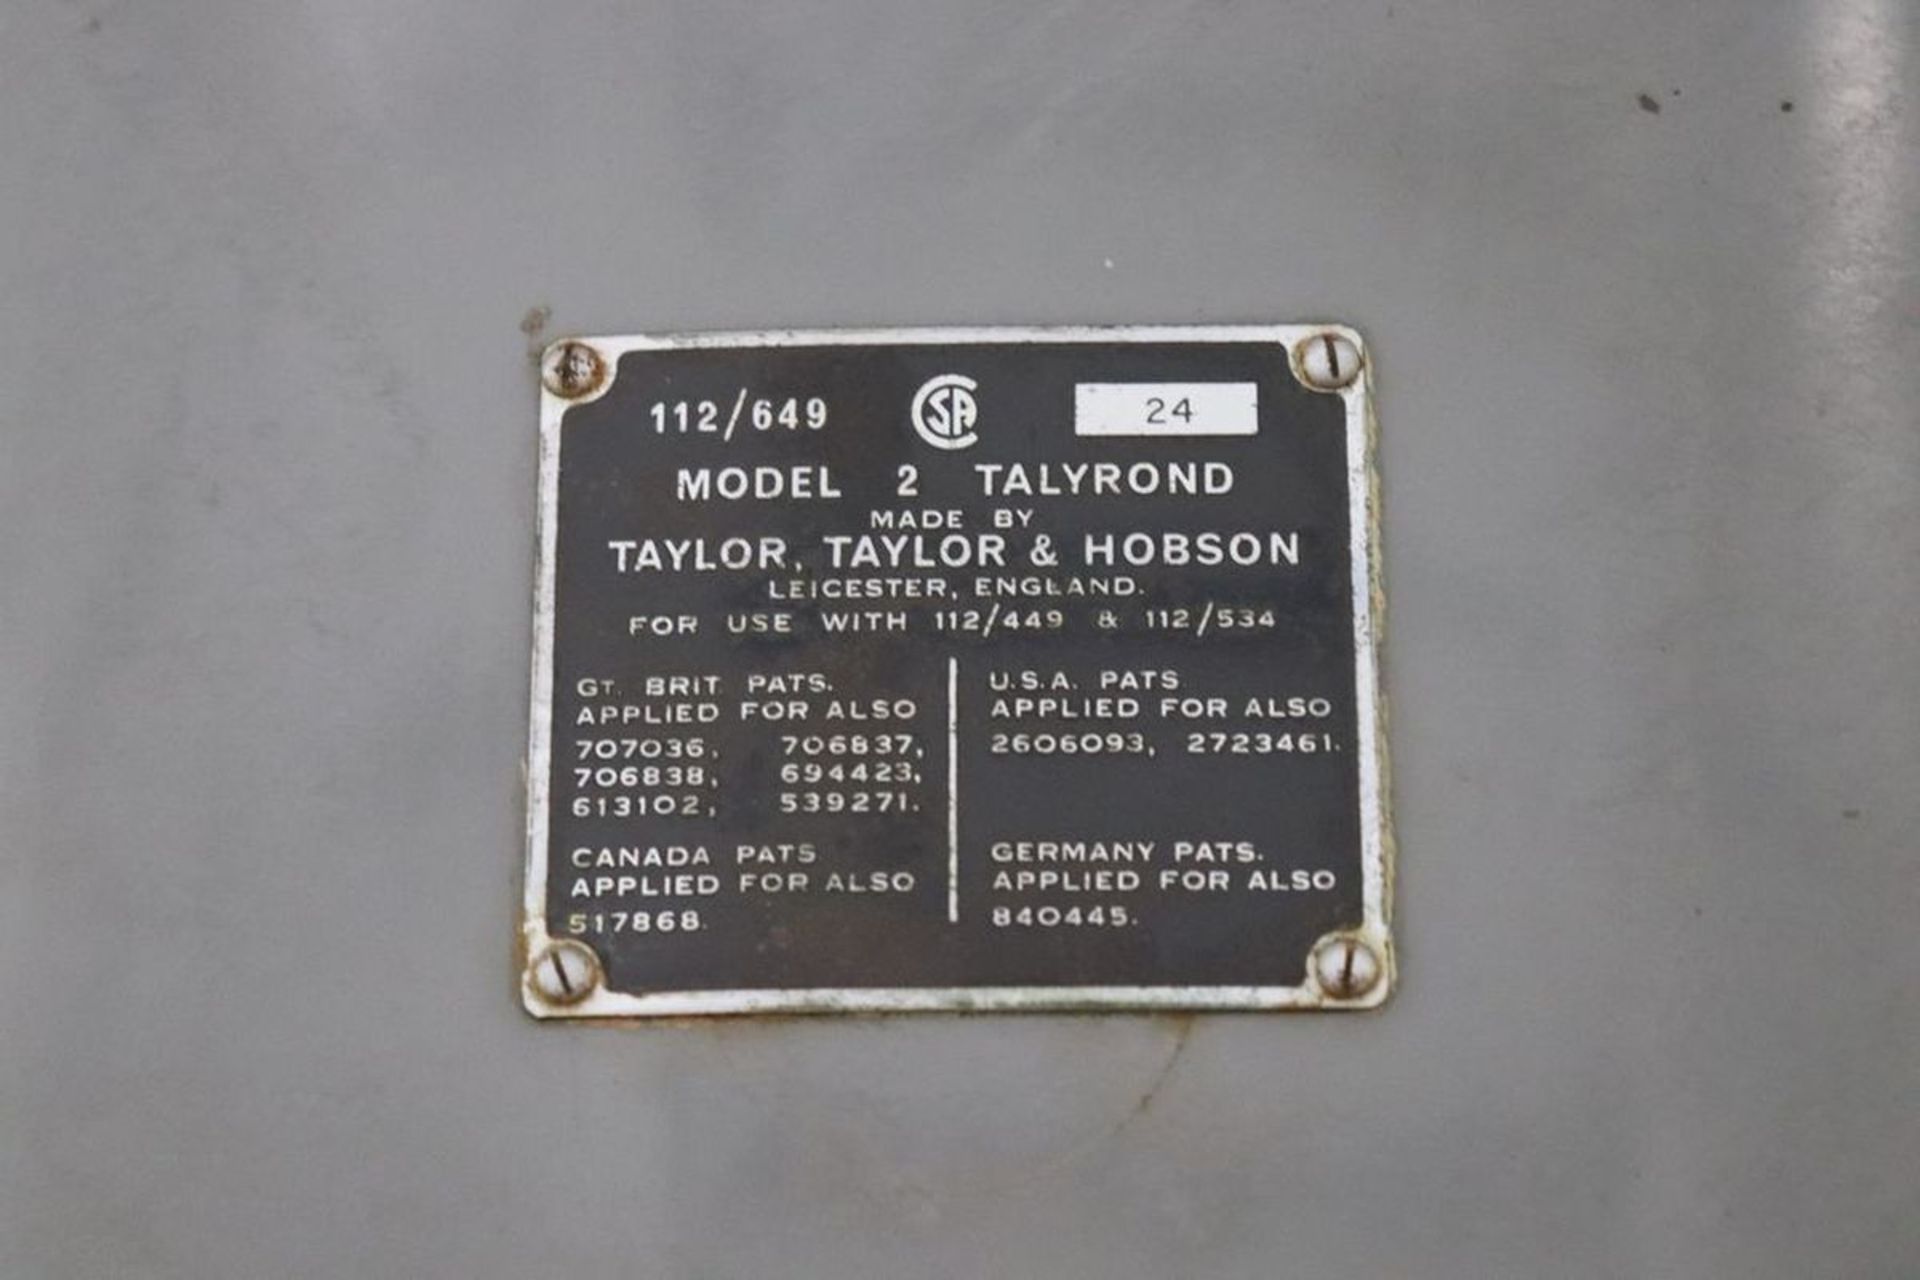 Taylor & Hobson 2 Talyrond Roundness Tester - Image 13 of 15